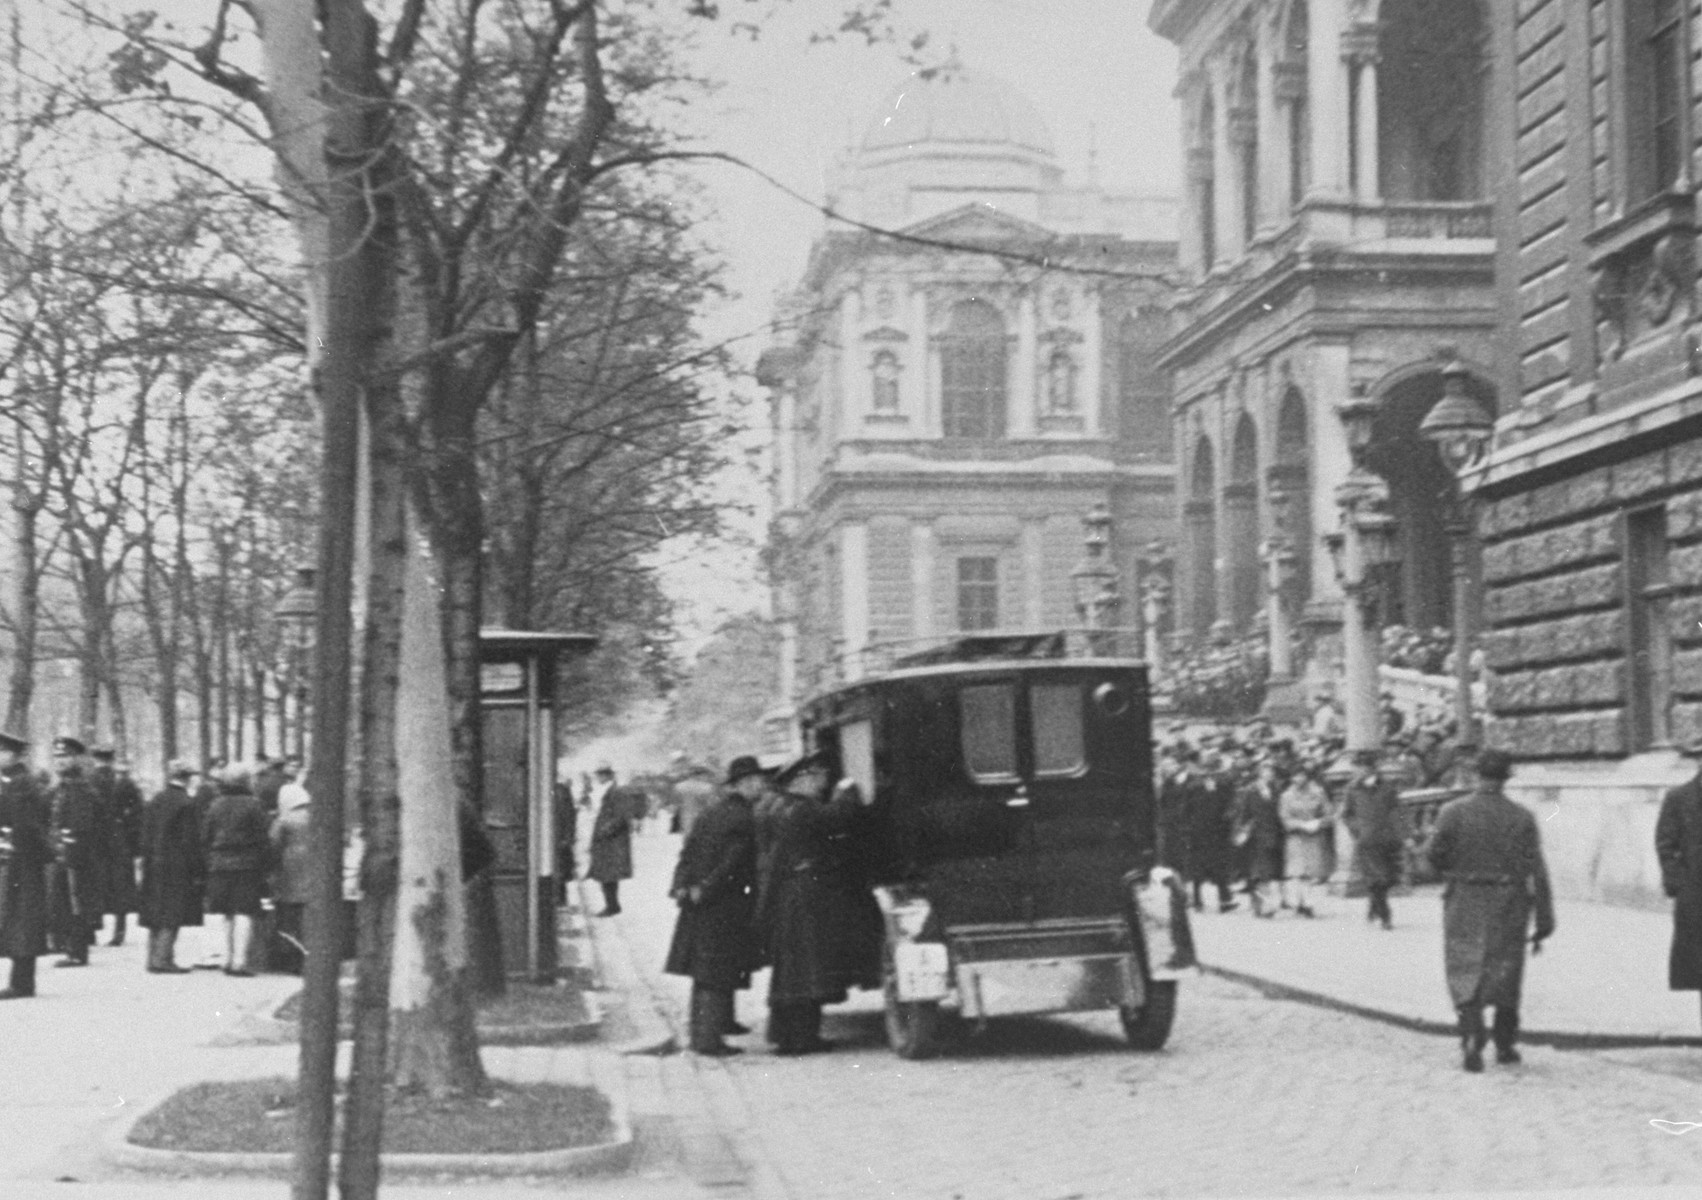 An ambulance takes students wounded during riots at the University of Vienna to the hospital. The riots occurred after Nazi attempts to prevent Jews from entering the University.